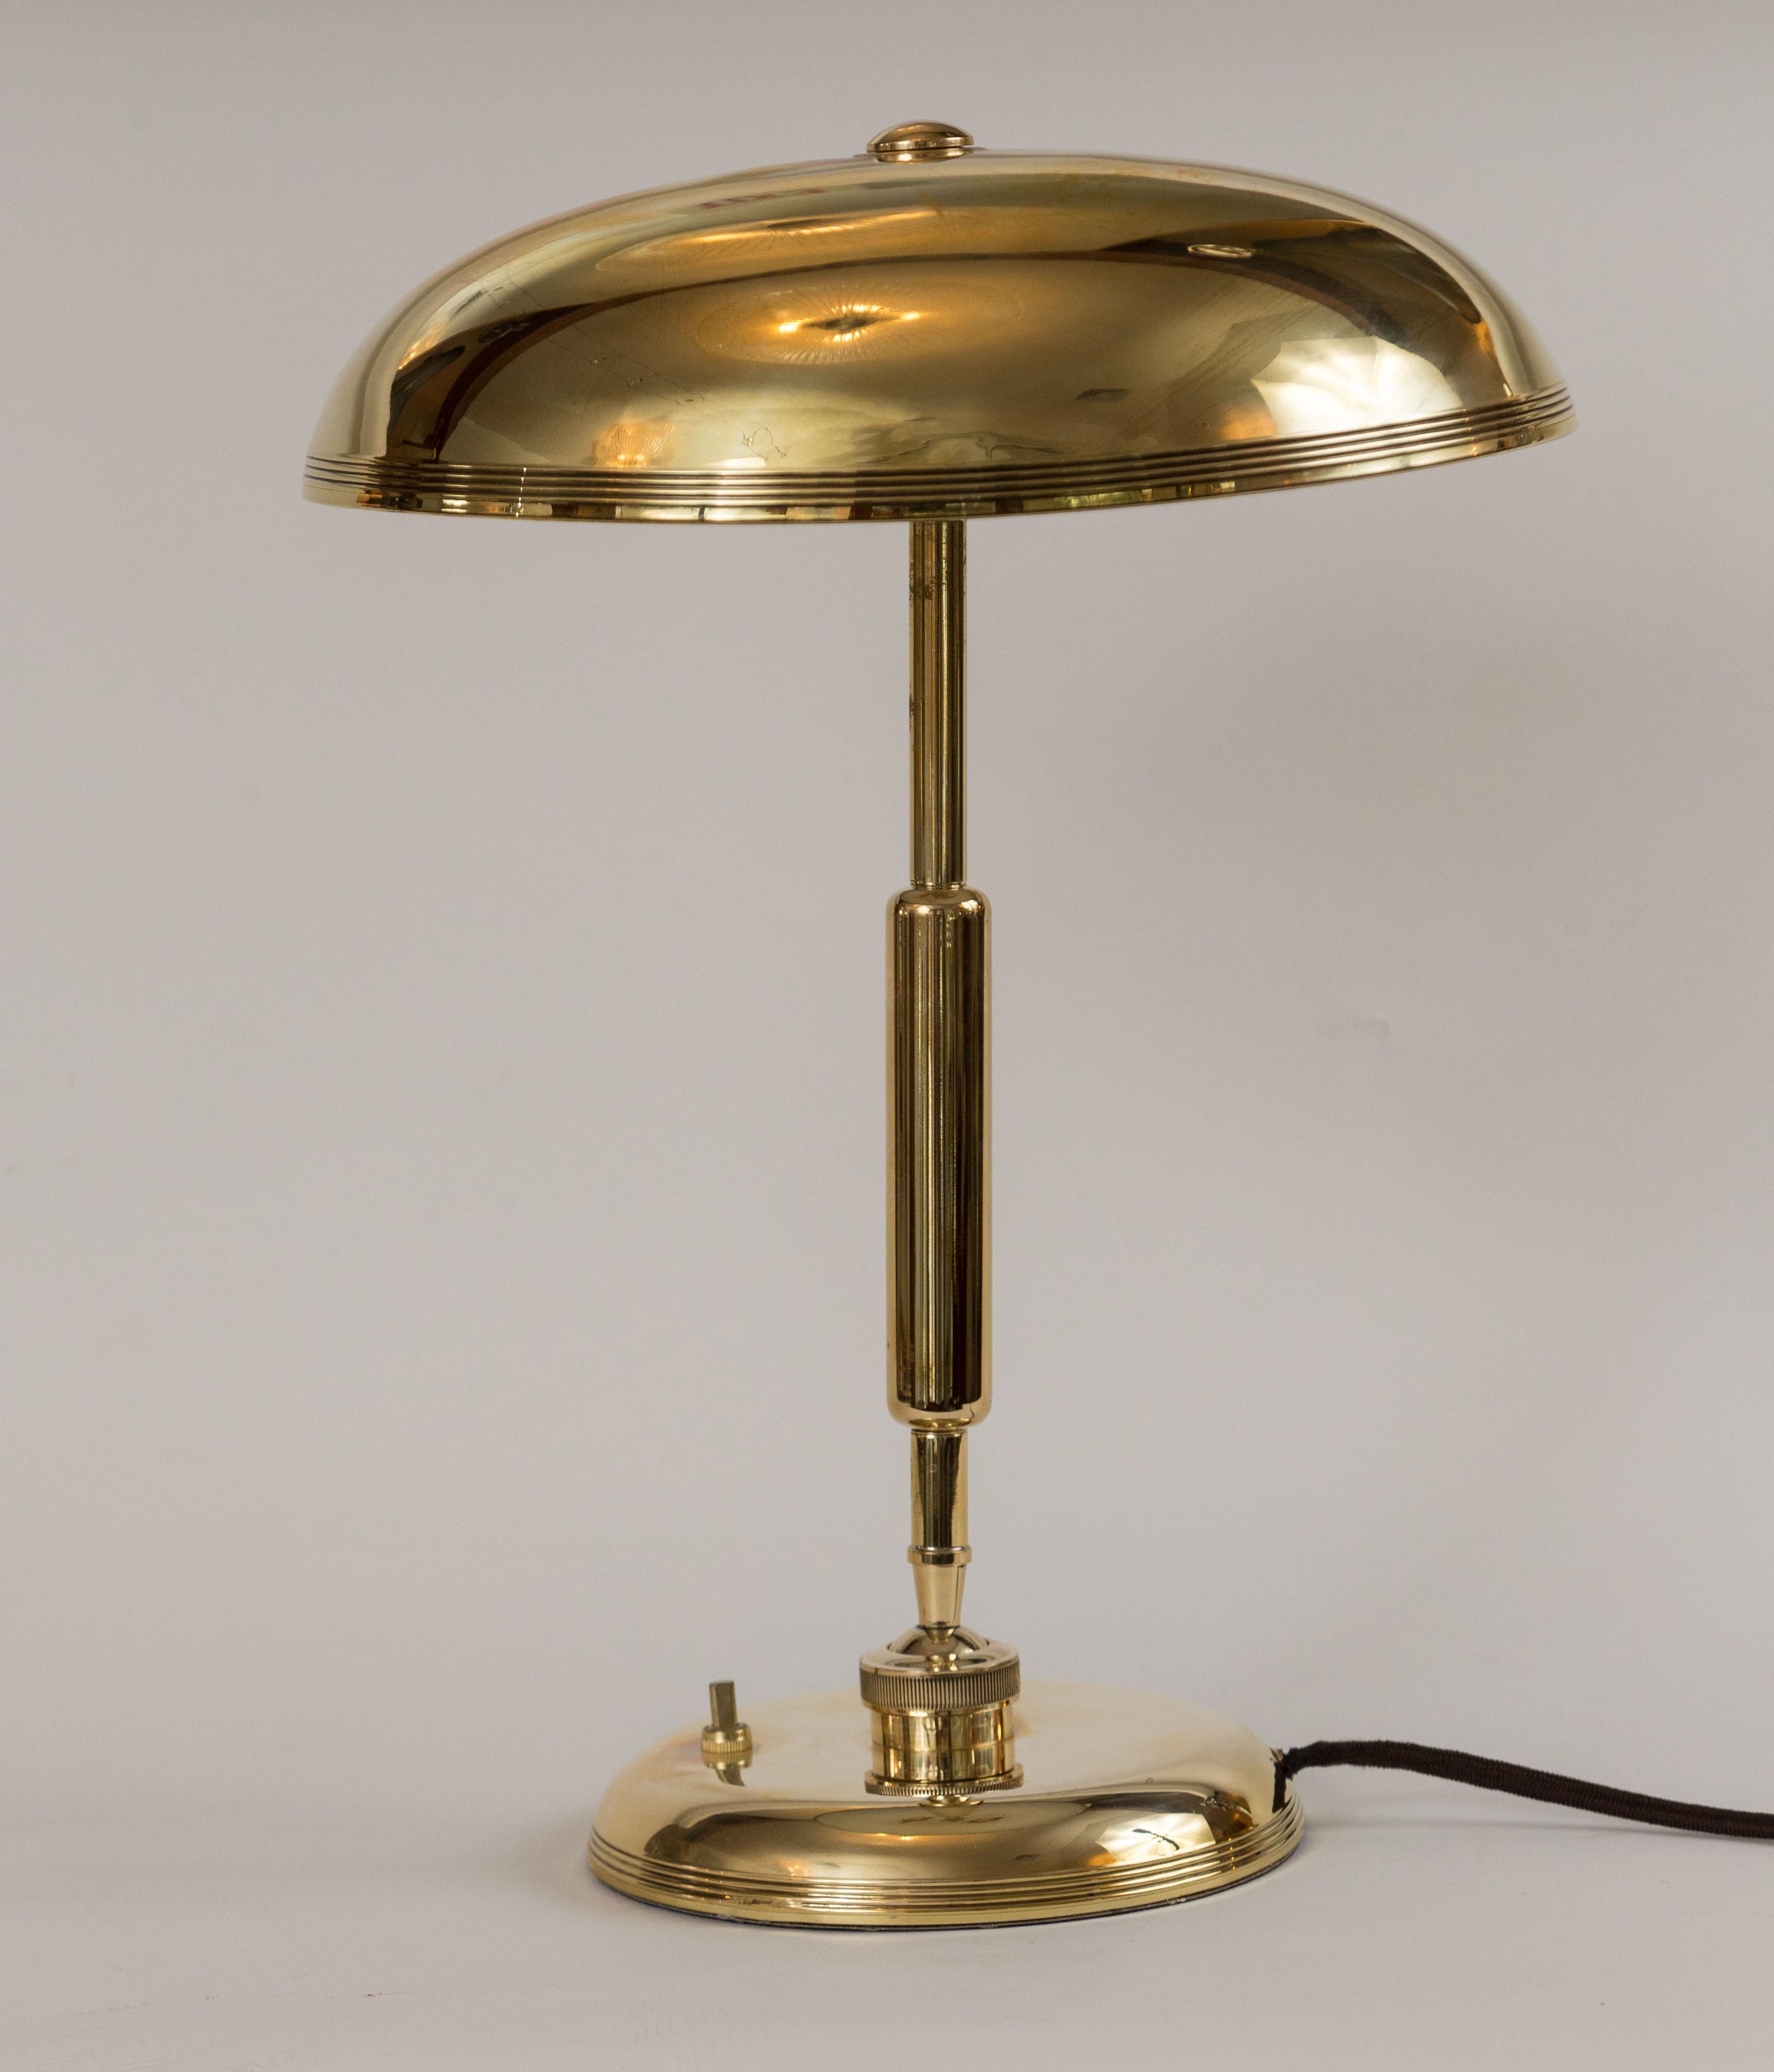 A fully restored brass table lamp by architect Giovanni Michelucci and produced by Lariolux.  The design of the lamp had ingenious functionality of design as it consisted of two rotating  joints, one positioned at the base of the stem and the other